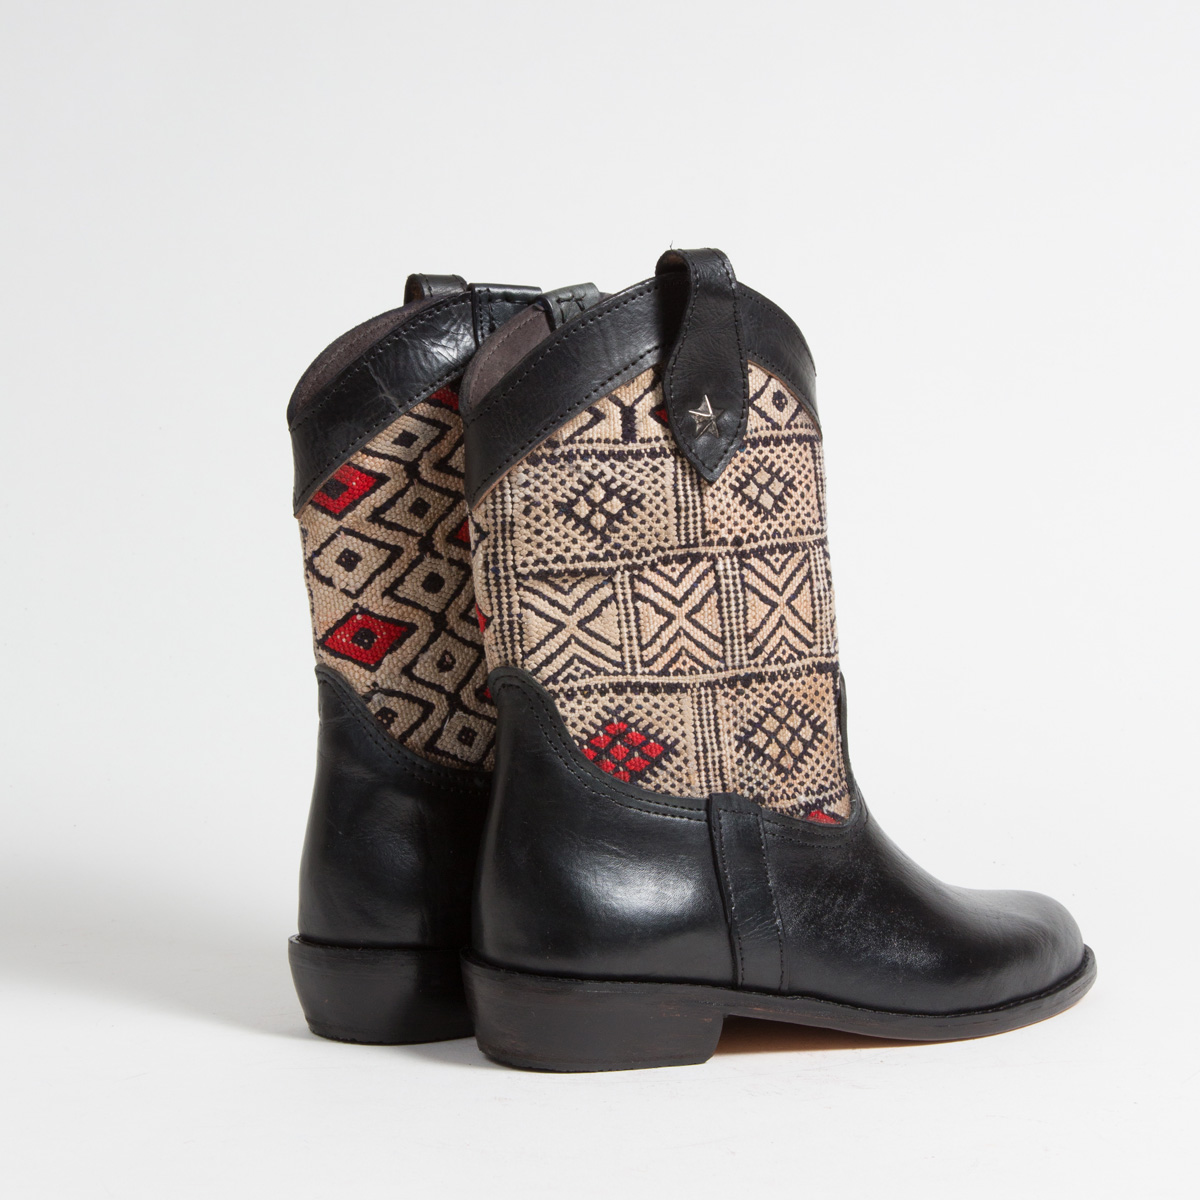 Bottines Kilim cuir mababouche artisanales (Réf. MN13-40)